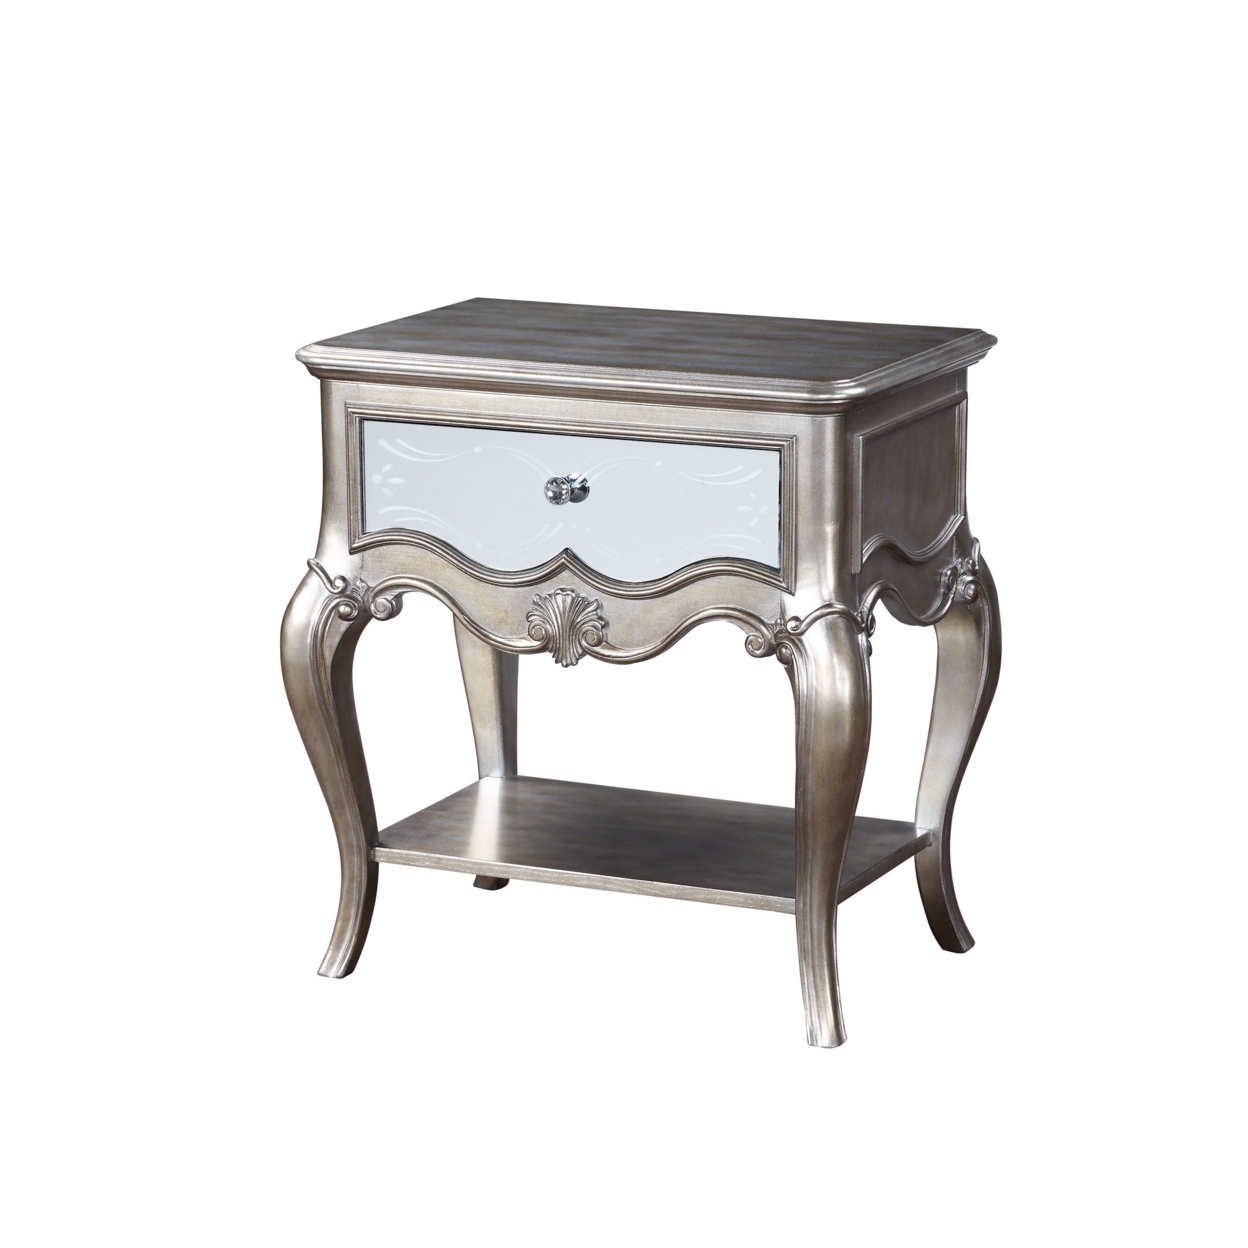 Nightstand With Mirror Panel Front And Molded Trim, Antique Silver- Saltoro Sherpi